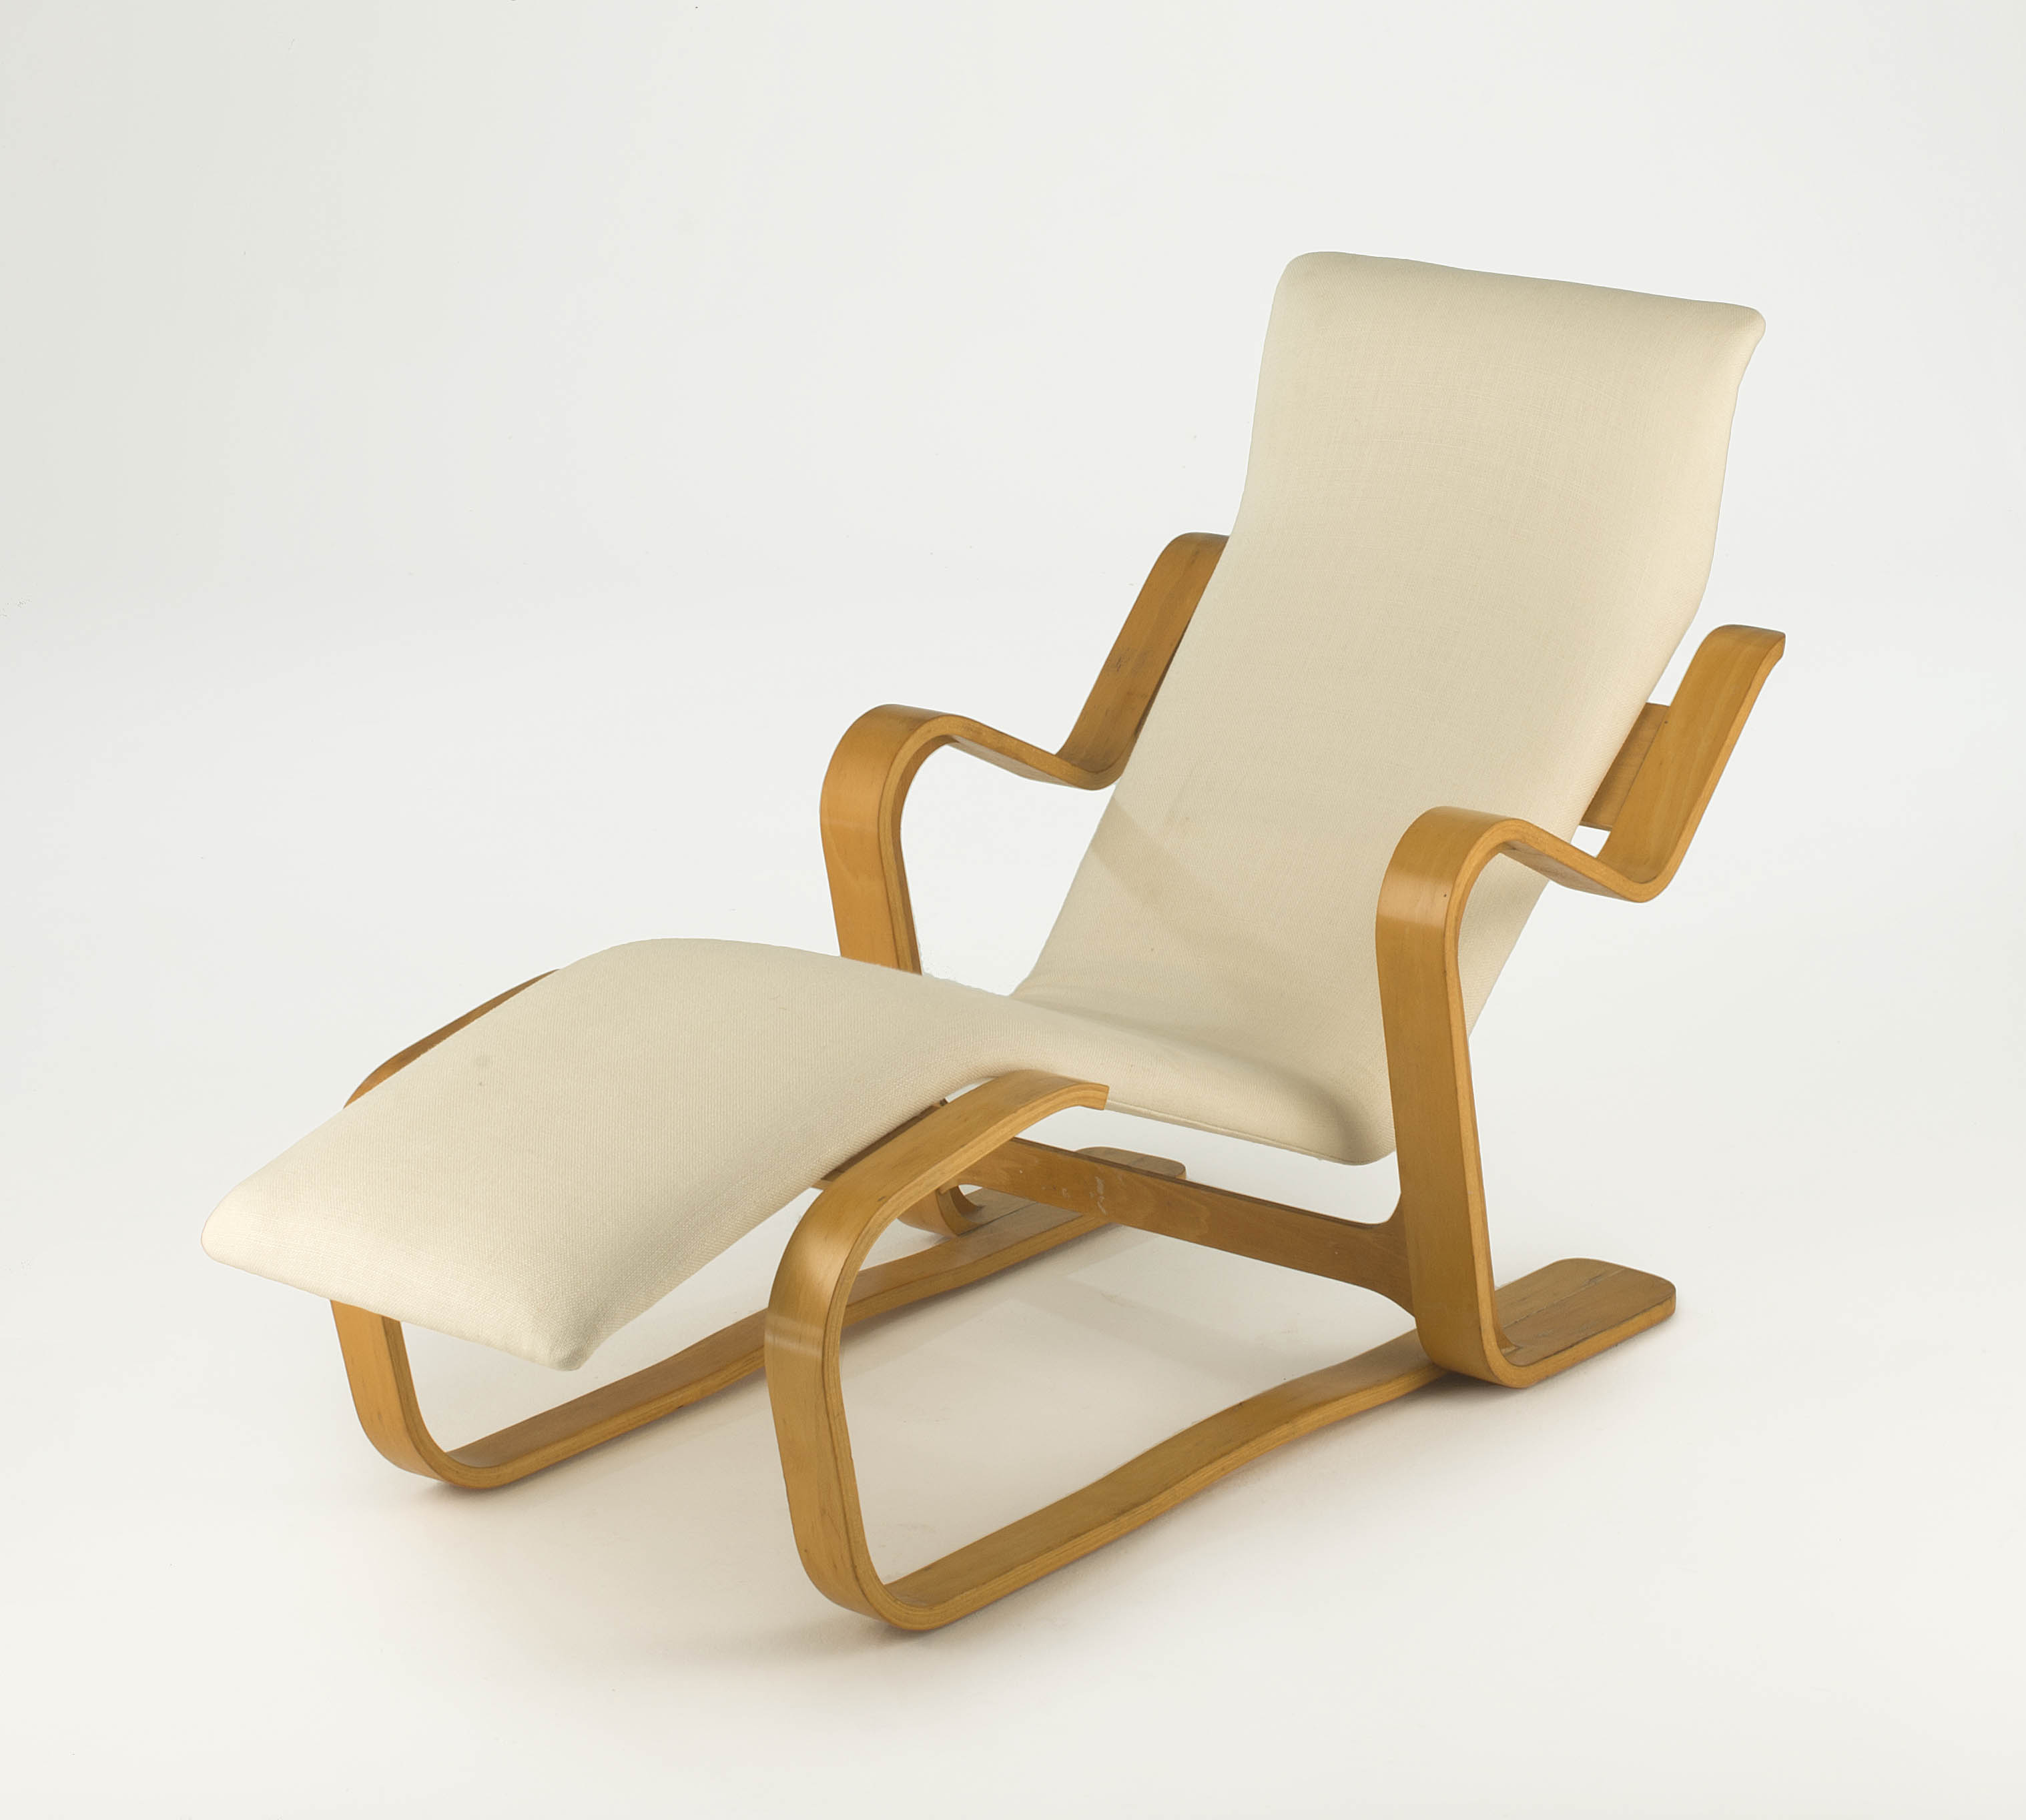 A Marcel Breuer Isokon chaize lounge chair for Knoll